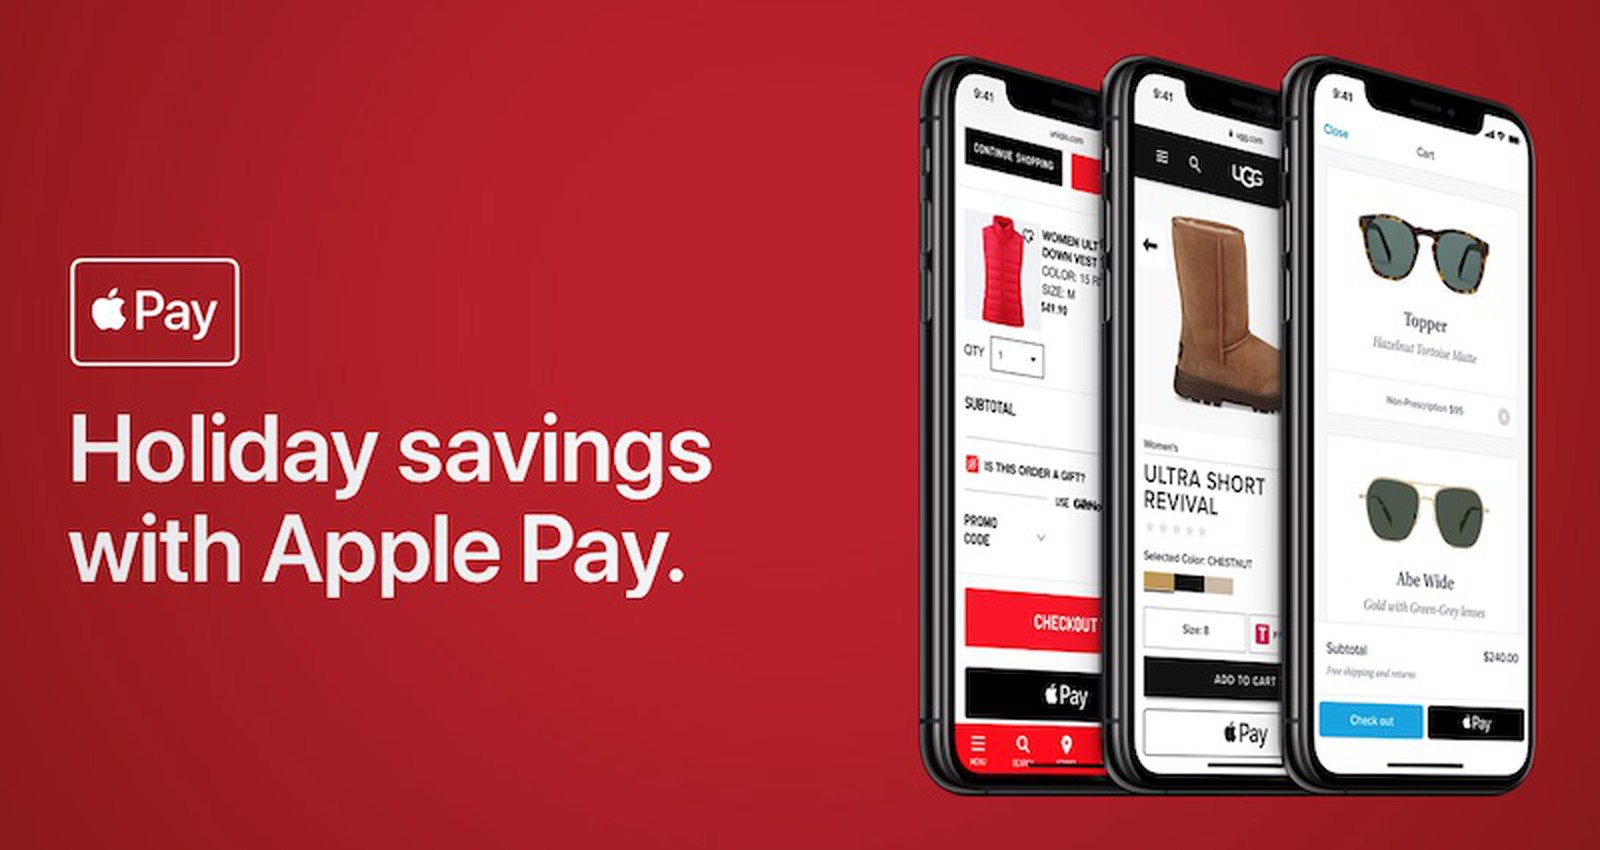 'Holiday Savings With Apple Pay' Promotion Expands to Additional Stores